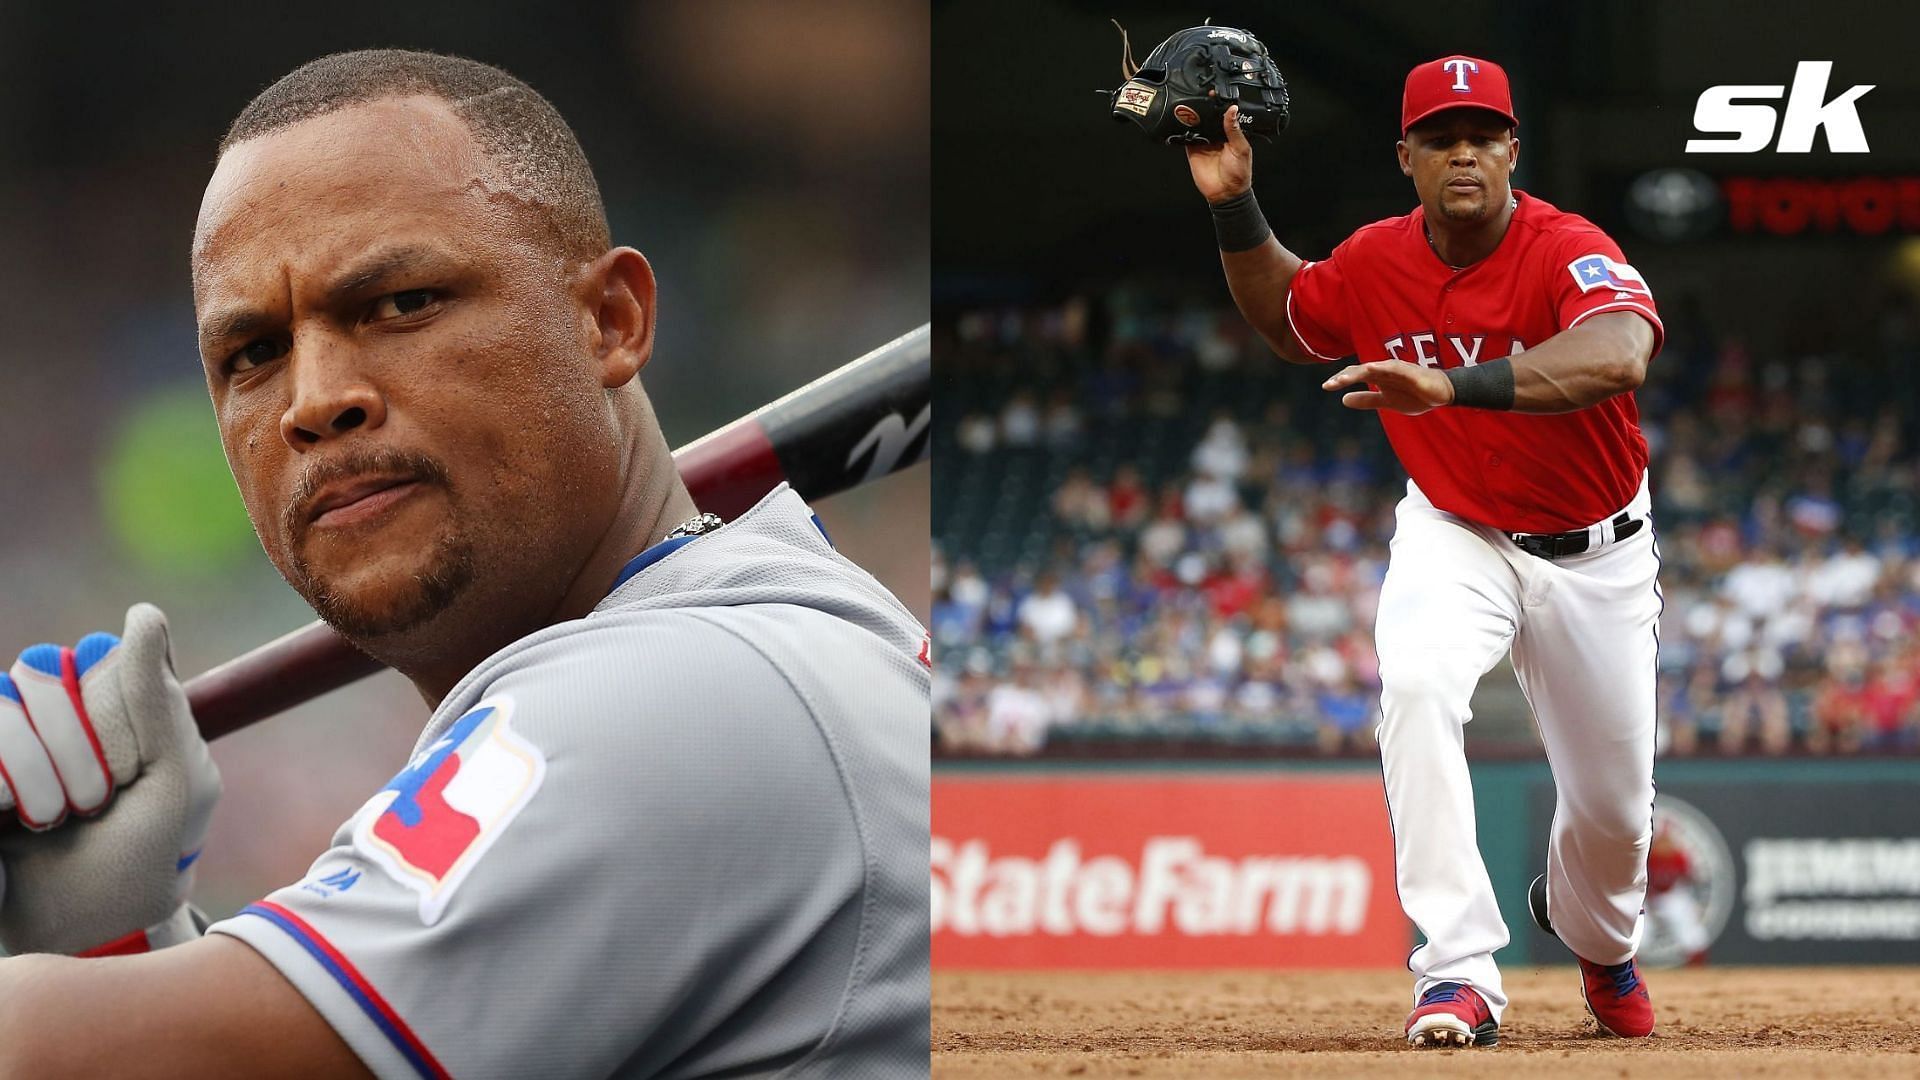 Adrian Beltre will become the third player to enter the Hall of Fame as a member of the Texas Rangers